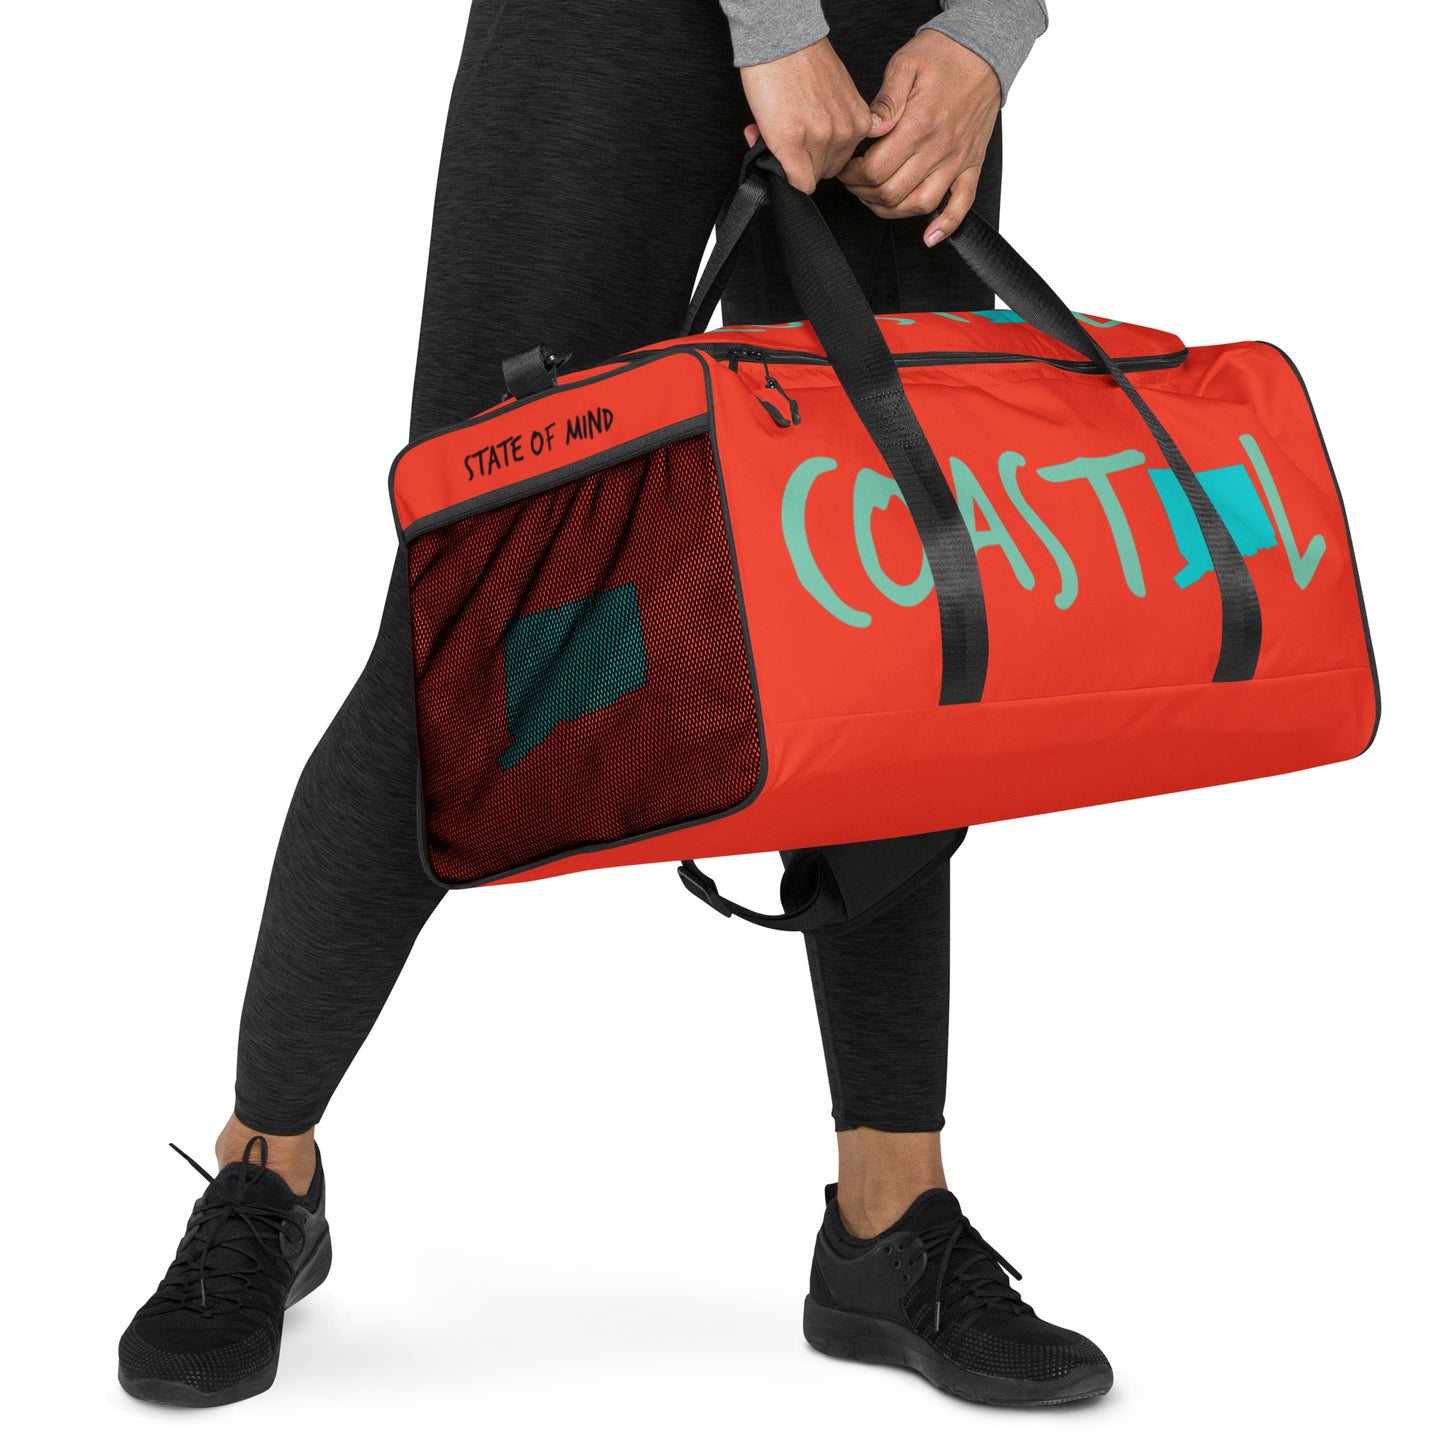 Coastal Connecticut™ Carry Everything-in-Style Duffel